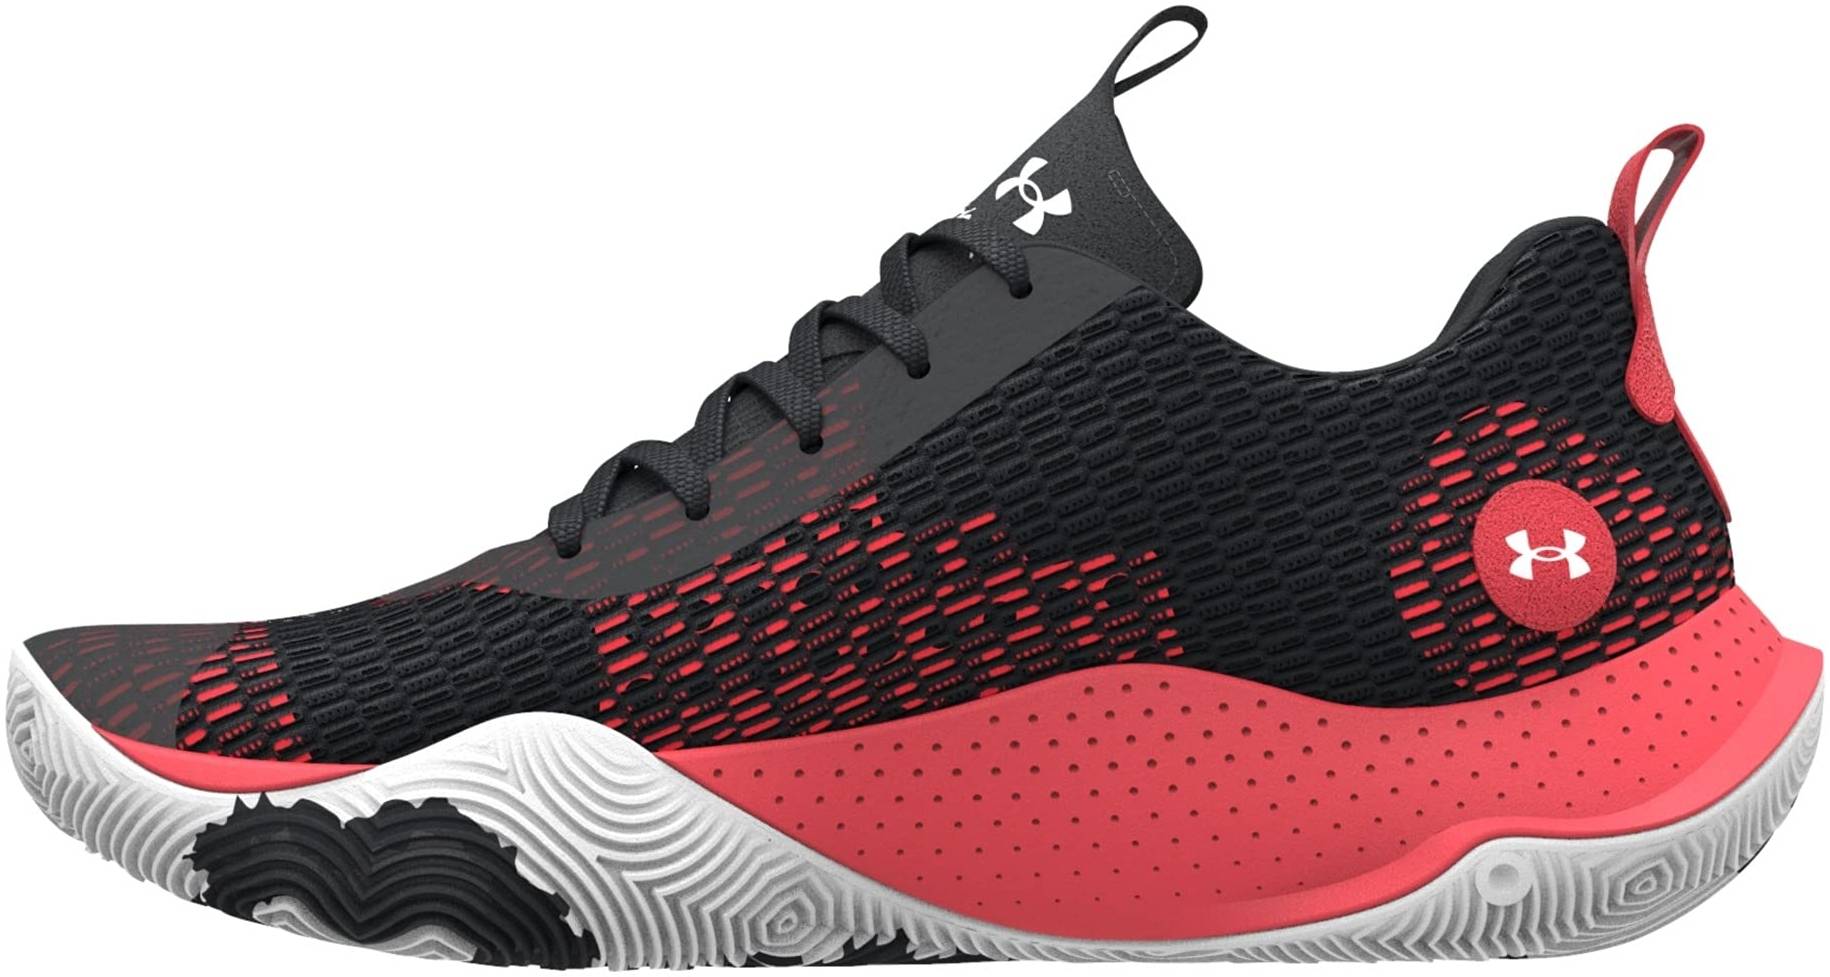 Under Armour Mens Spawn Mid Basketball Shoes 